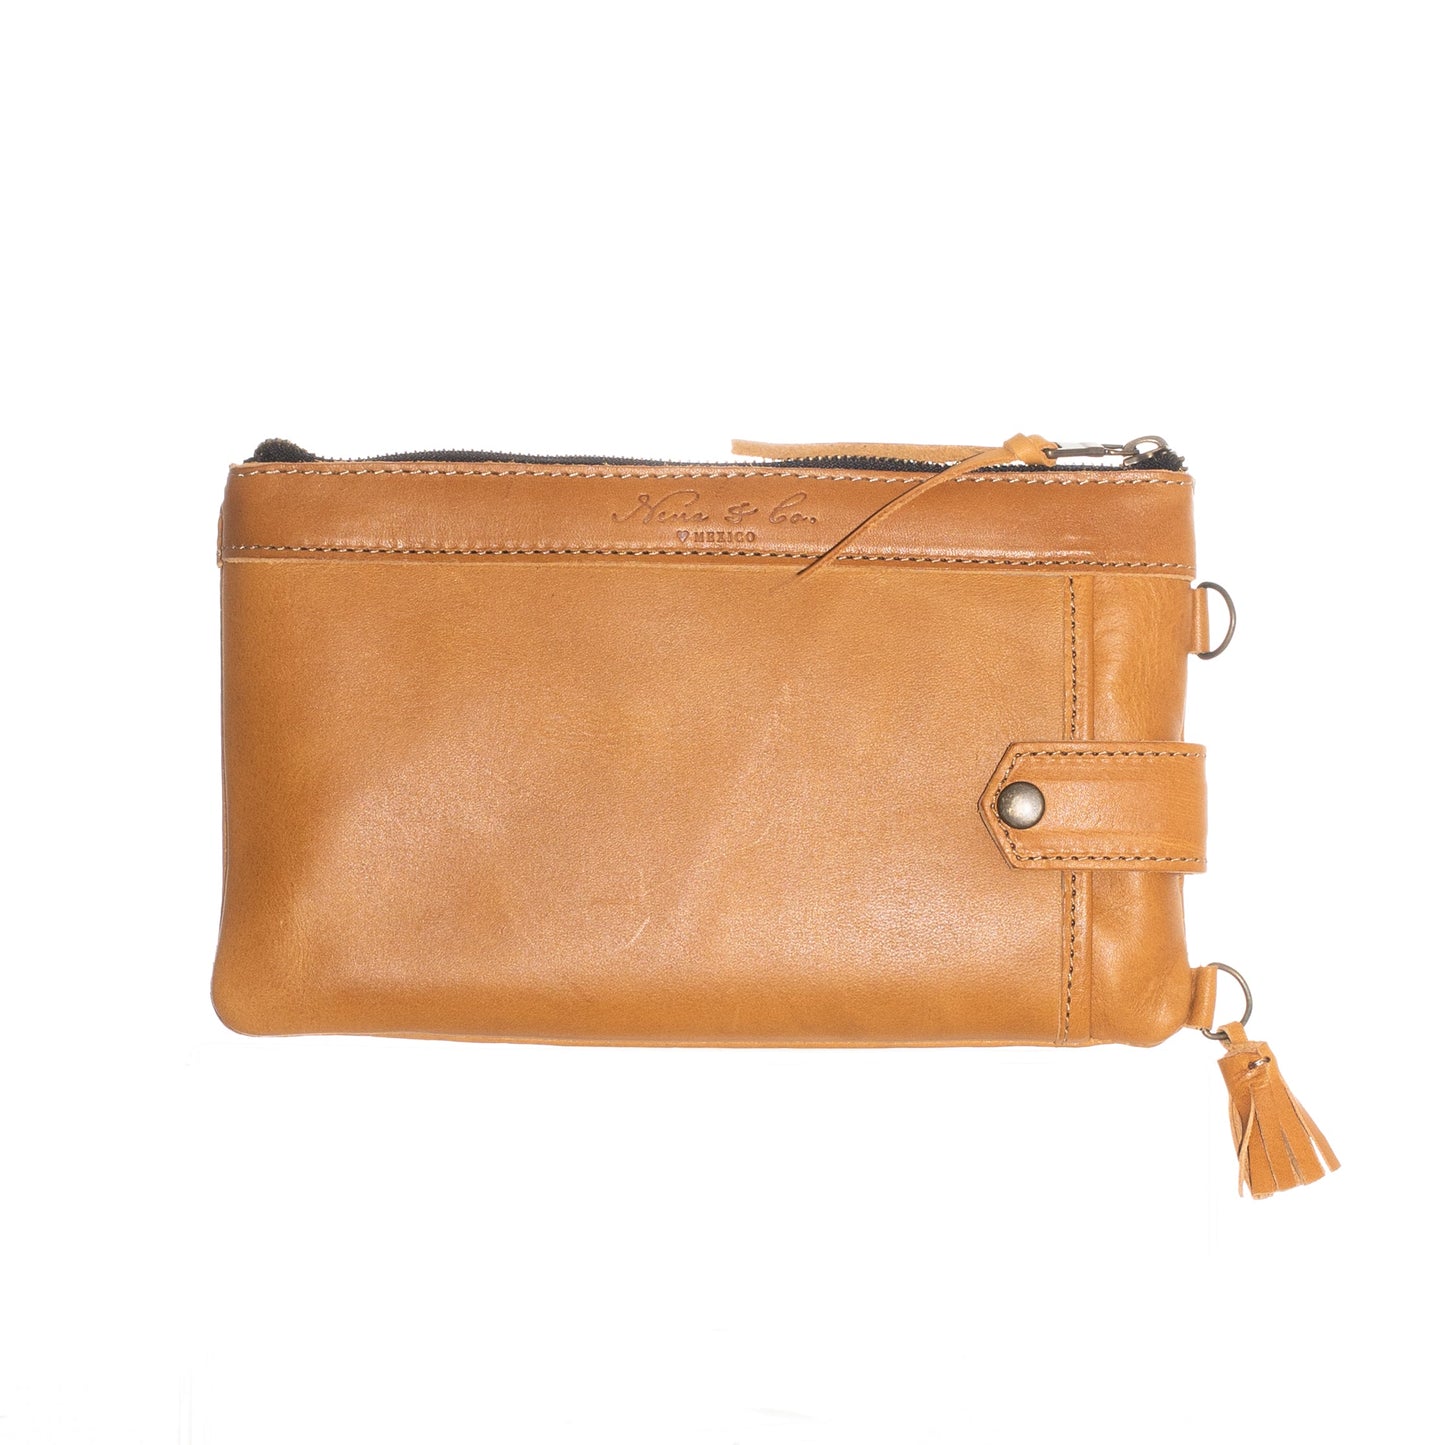 EVERYTHING CLUTCH - MEXICO COLLECTION - FULL LEATHER - TAWNY